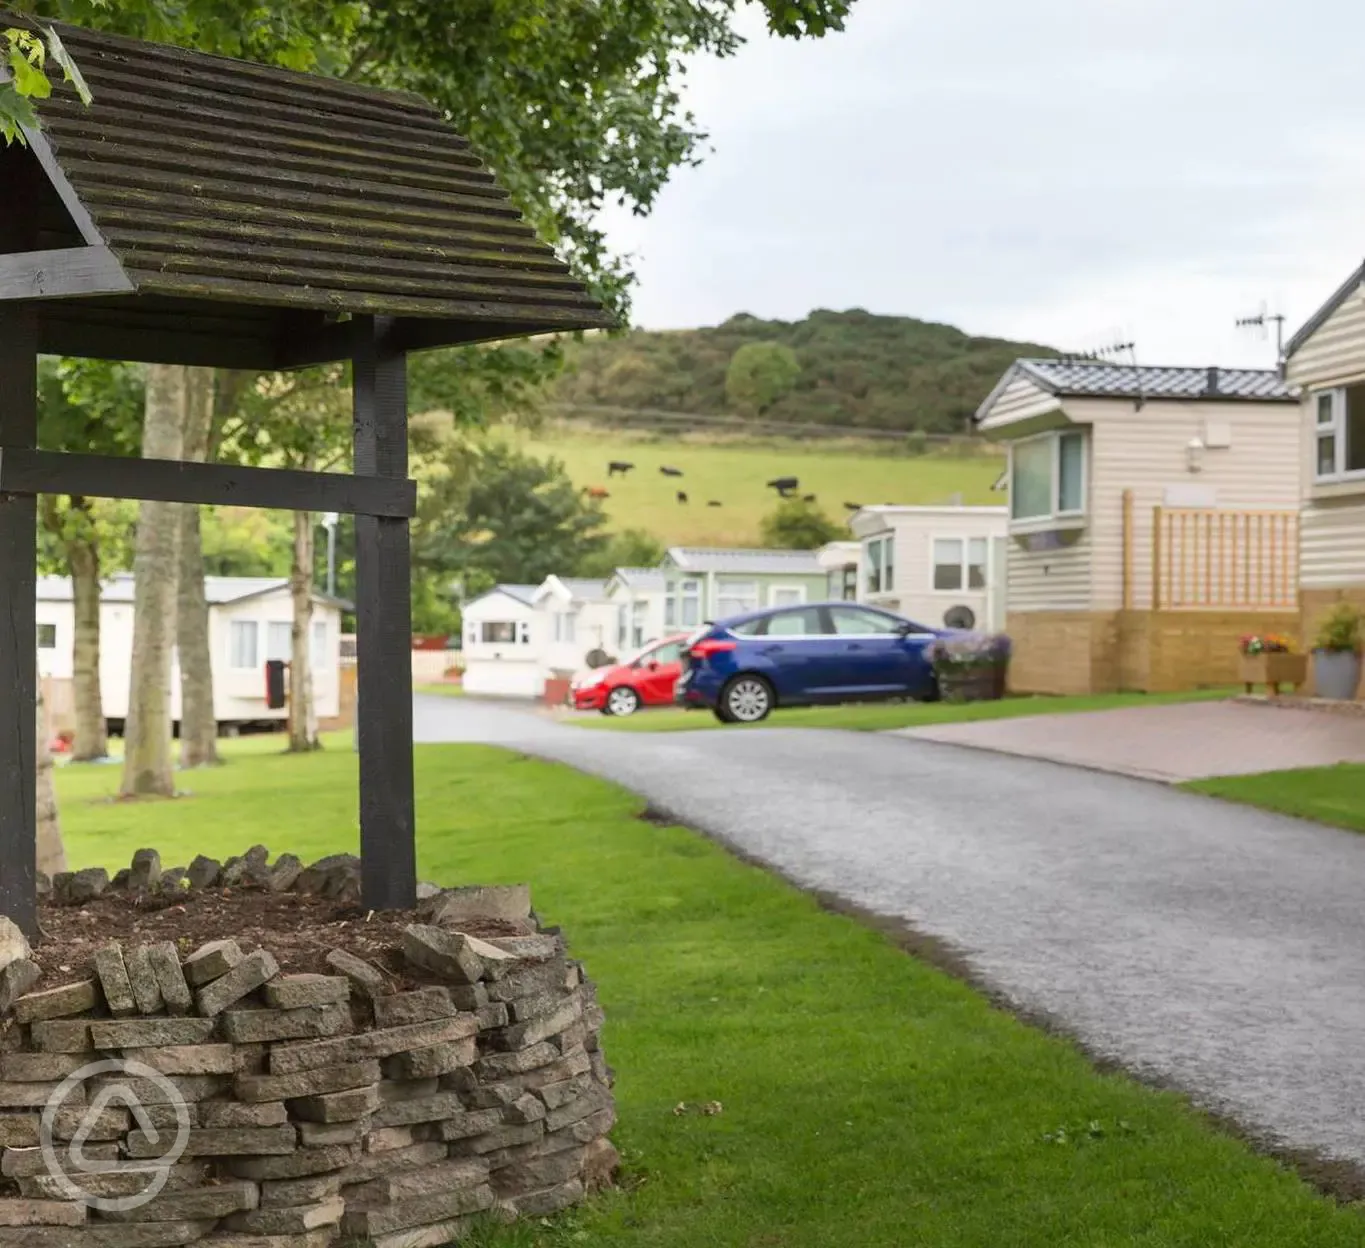 Holiday homes at Scoutscroft Leisure Park